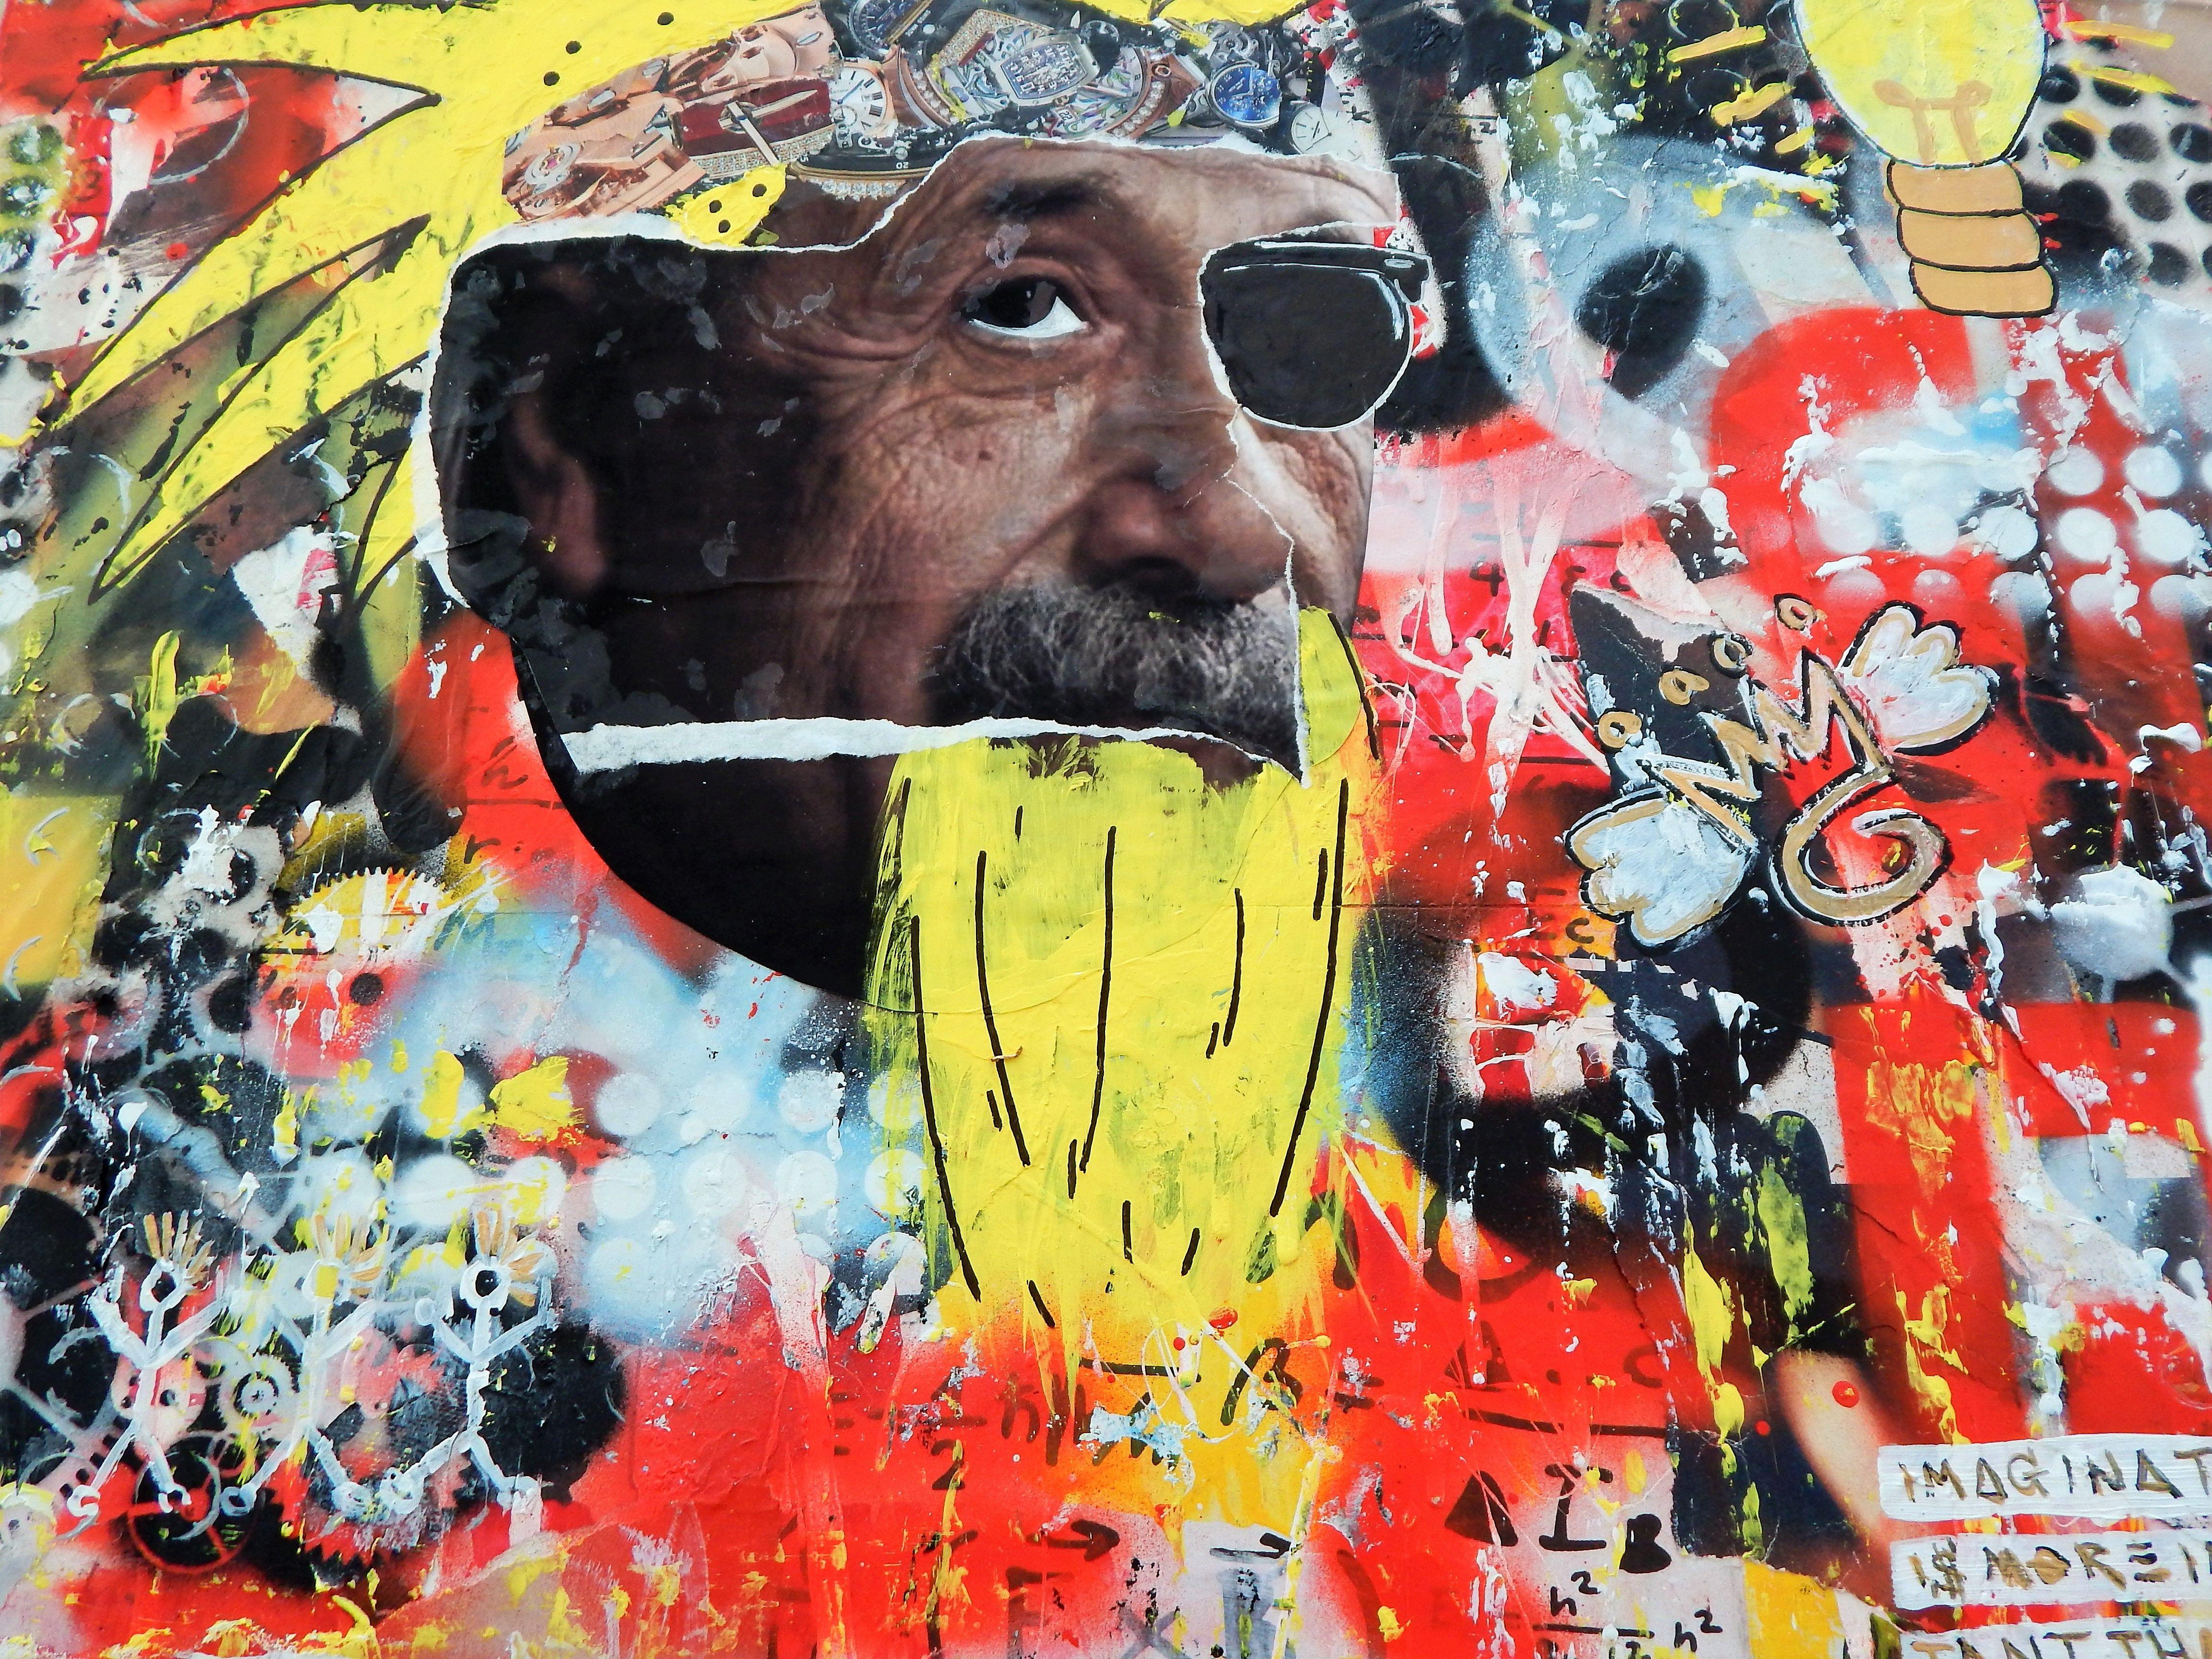 Multi layer image of Albert Einstein with base layer representing the crazy, out of the box thinker and the top layer, the plain black and white personality.  Collage materials including street posters from Wynwood Miami, acrylics, spray paints on